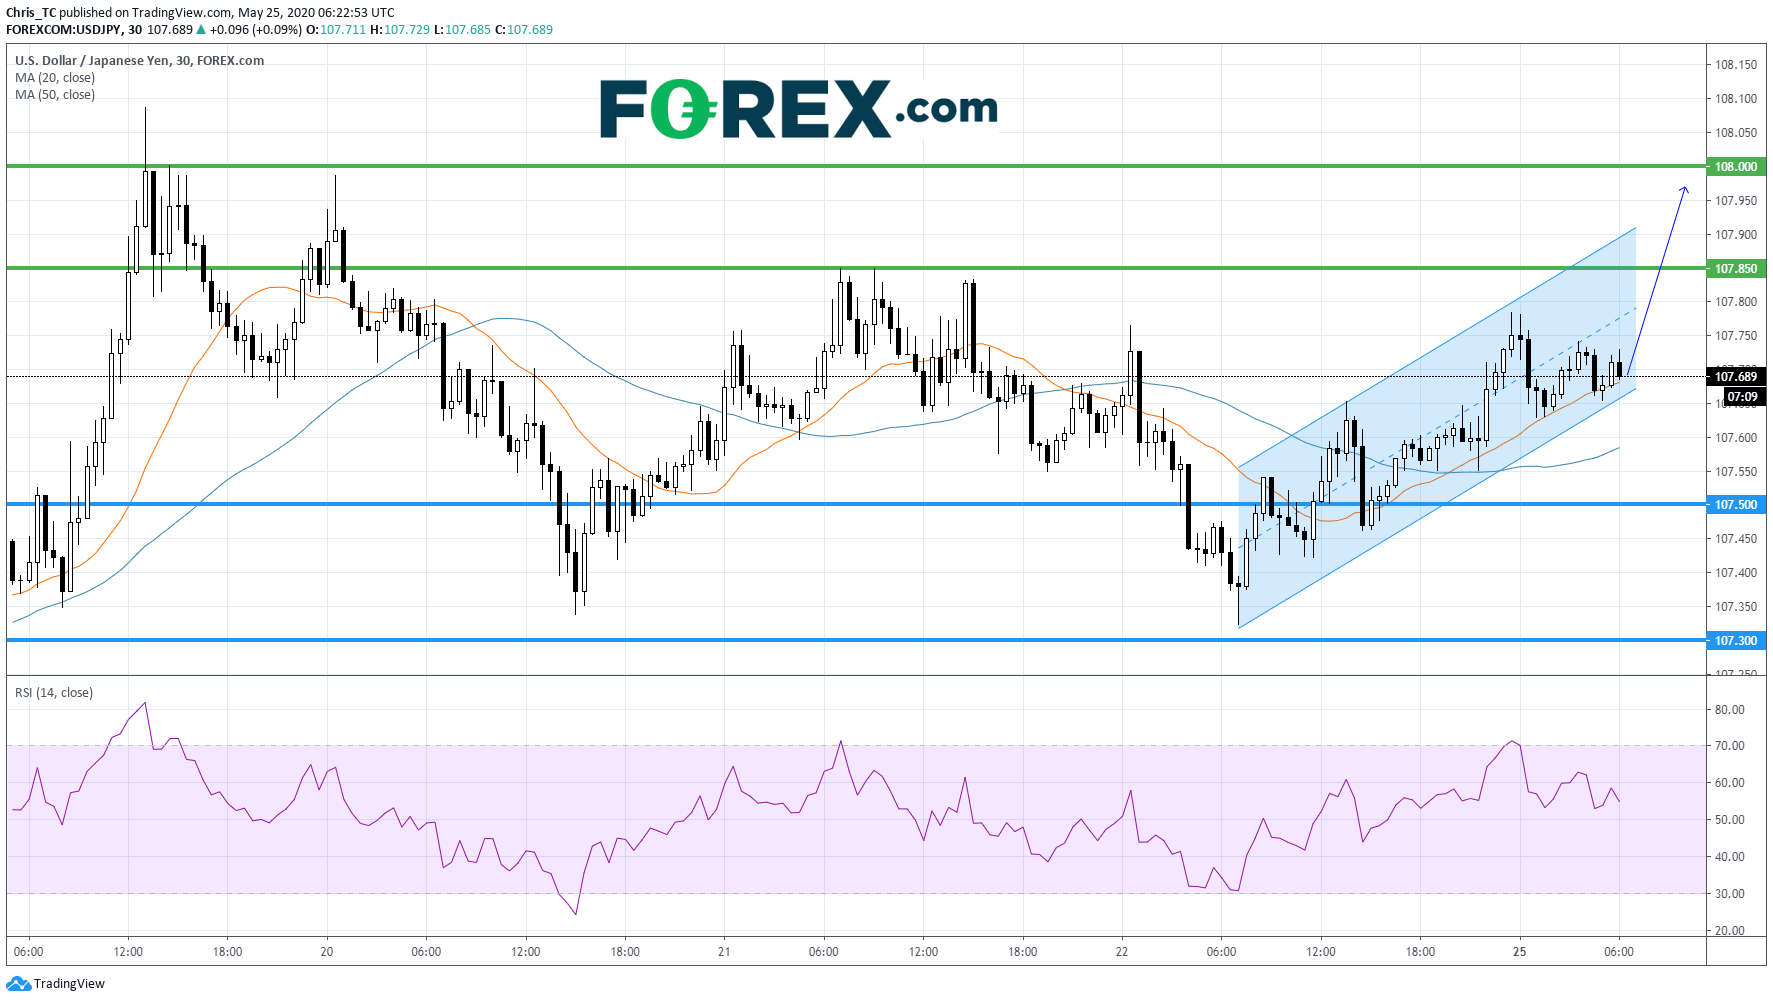 Market chart of US Dollar(USD) vs JPY. Published in May 2020 by FOREX.com